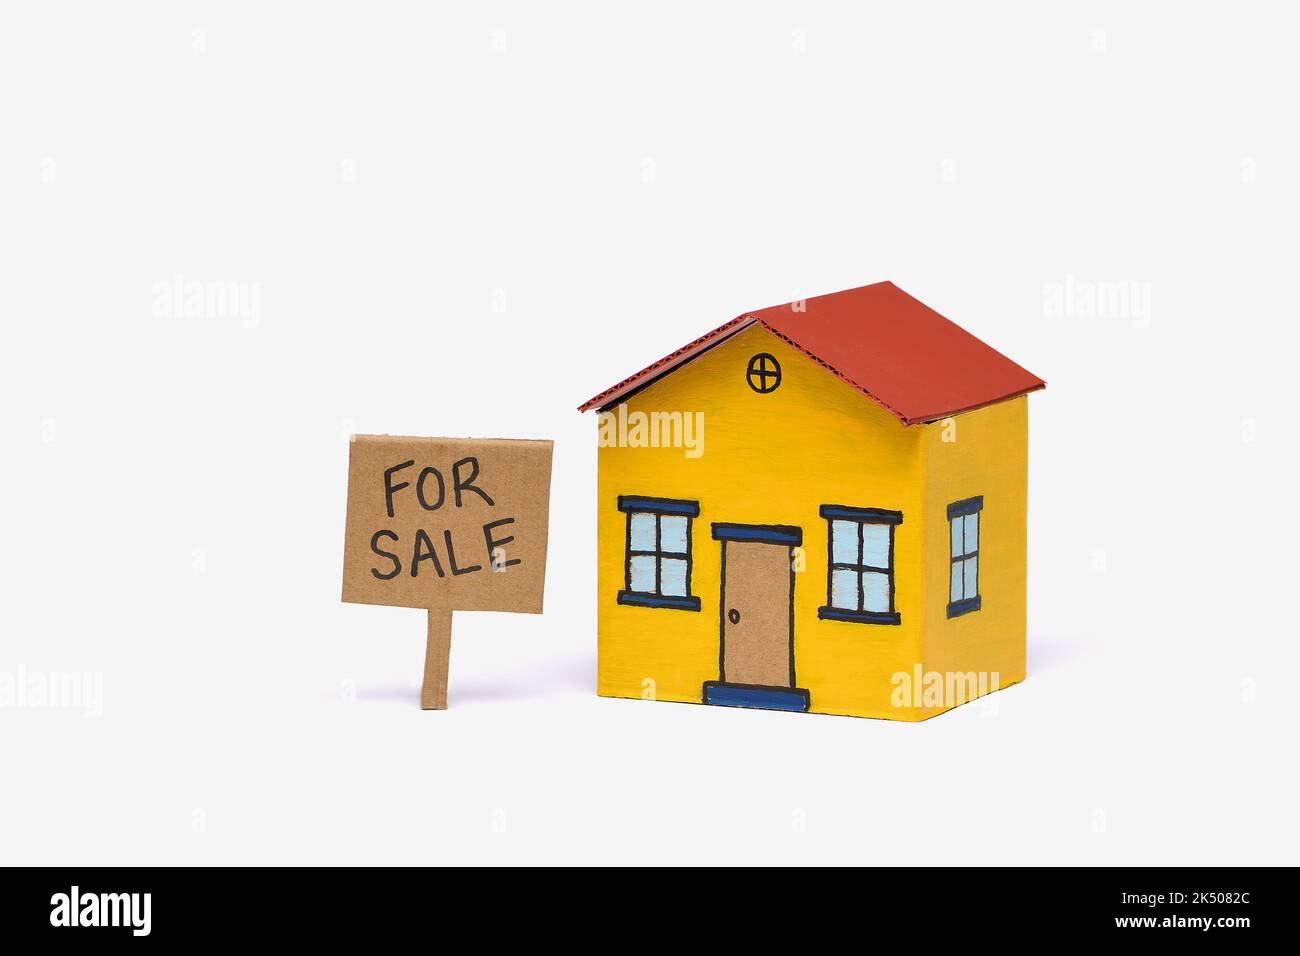 A yellow and red toy cardboard house in the middle of frame isolated on a white background with a Realestate For Sale sign, captured in a studio Stock Photo